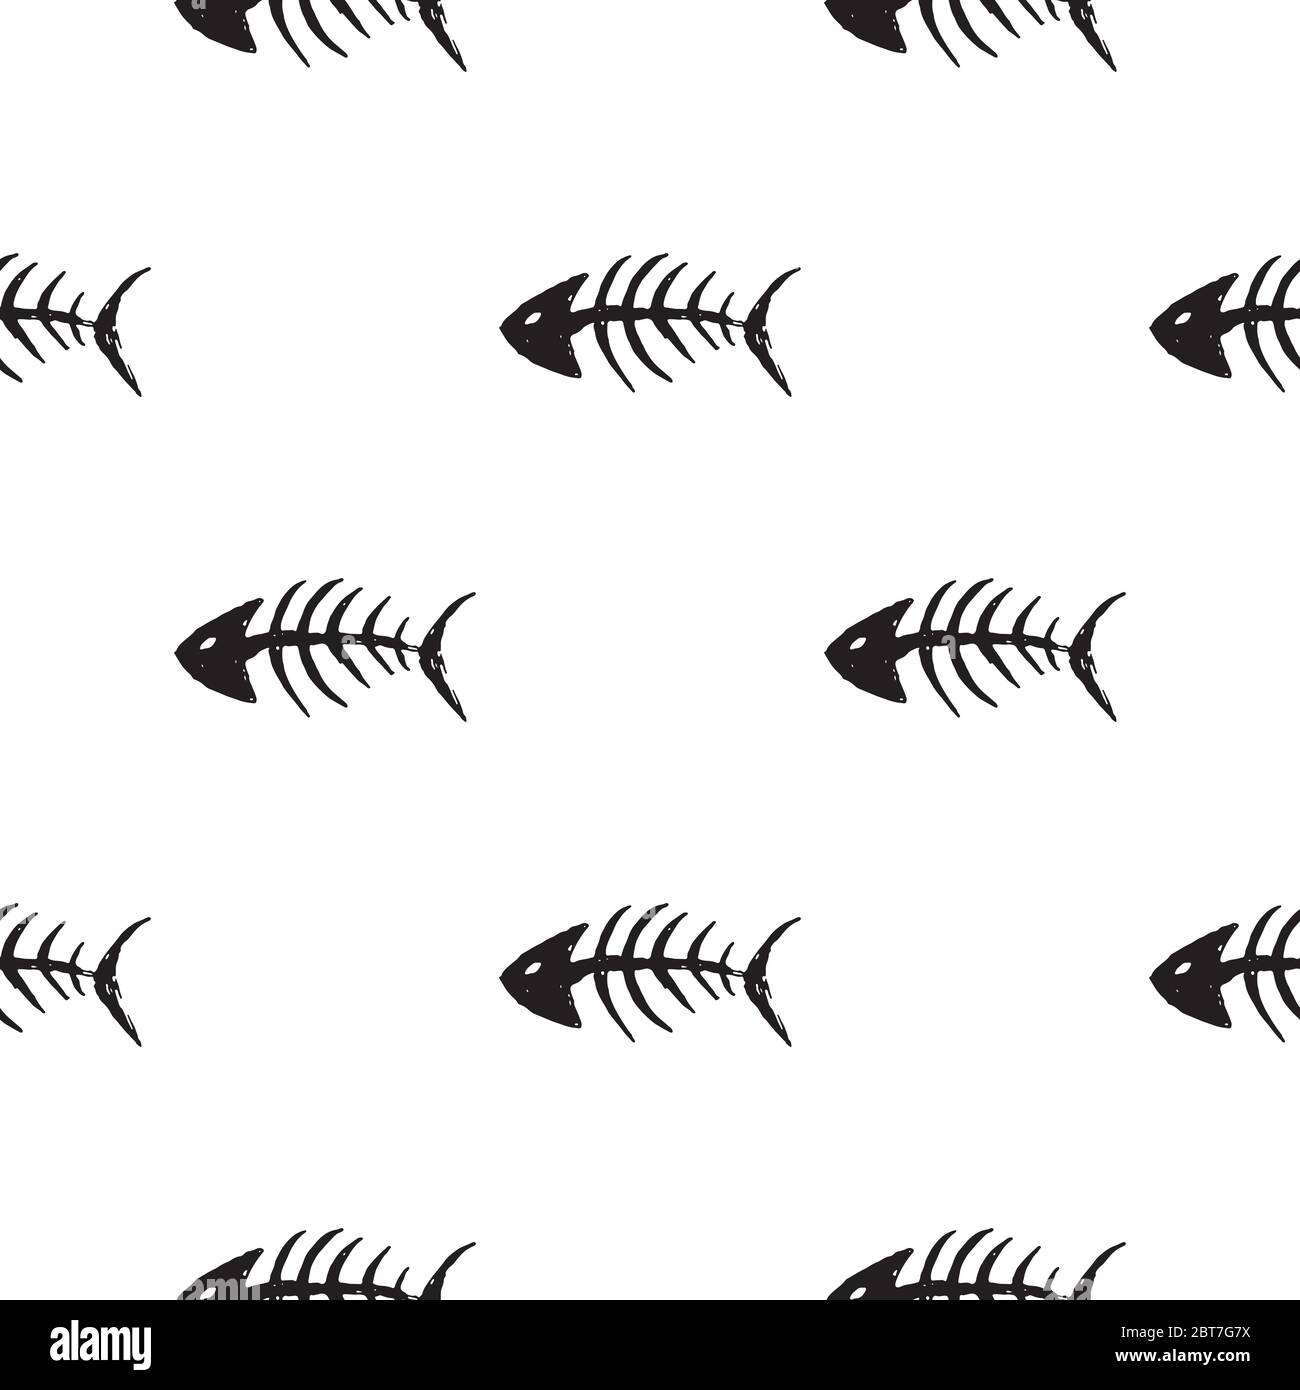 Seamless fish skeleton pattern, hand-drawn elements in doodle